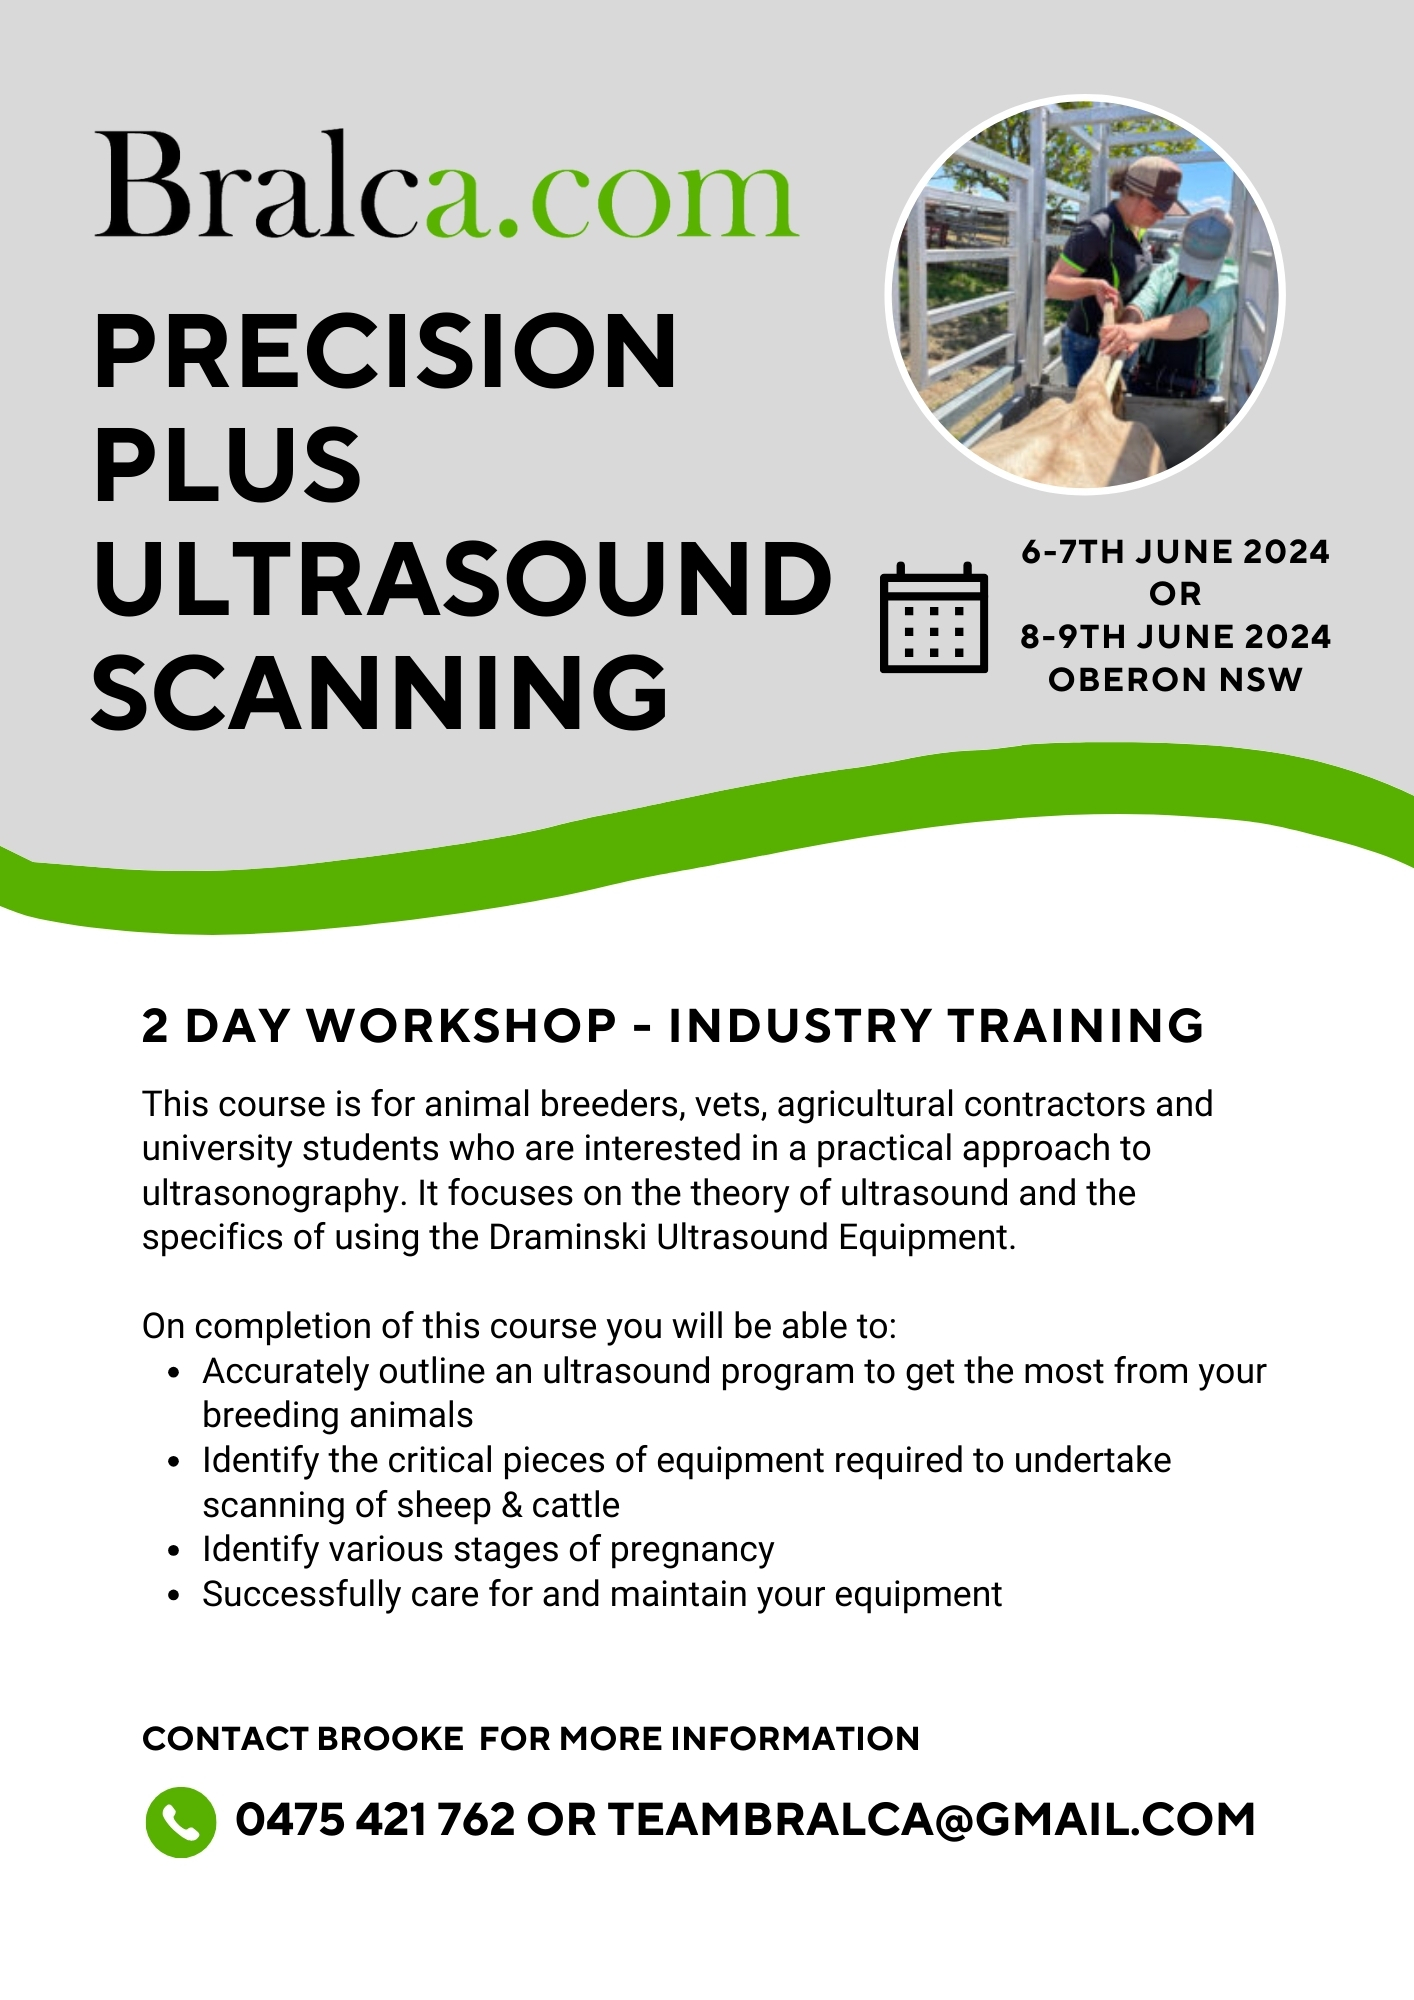 Flyer for Precision Plus Ultrasound Scanning Course